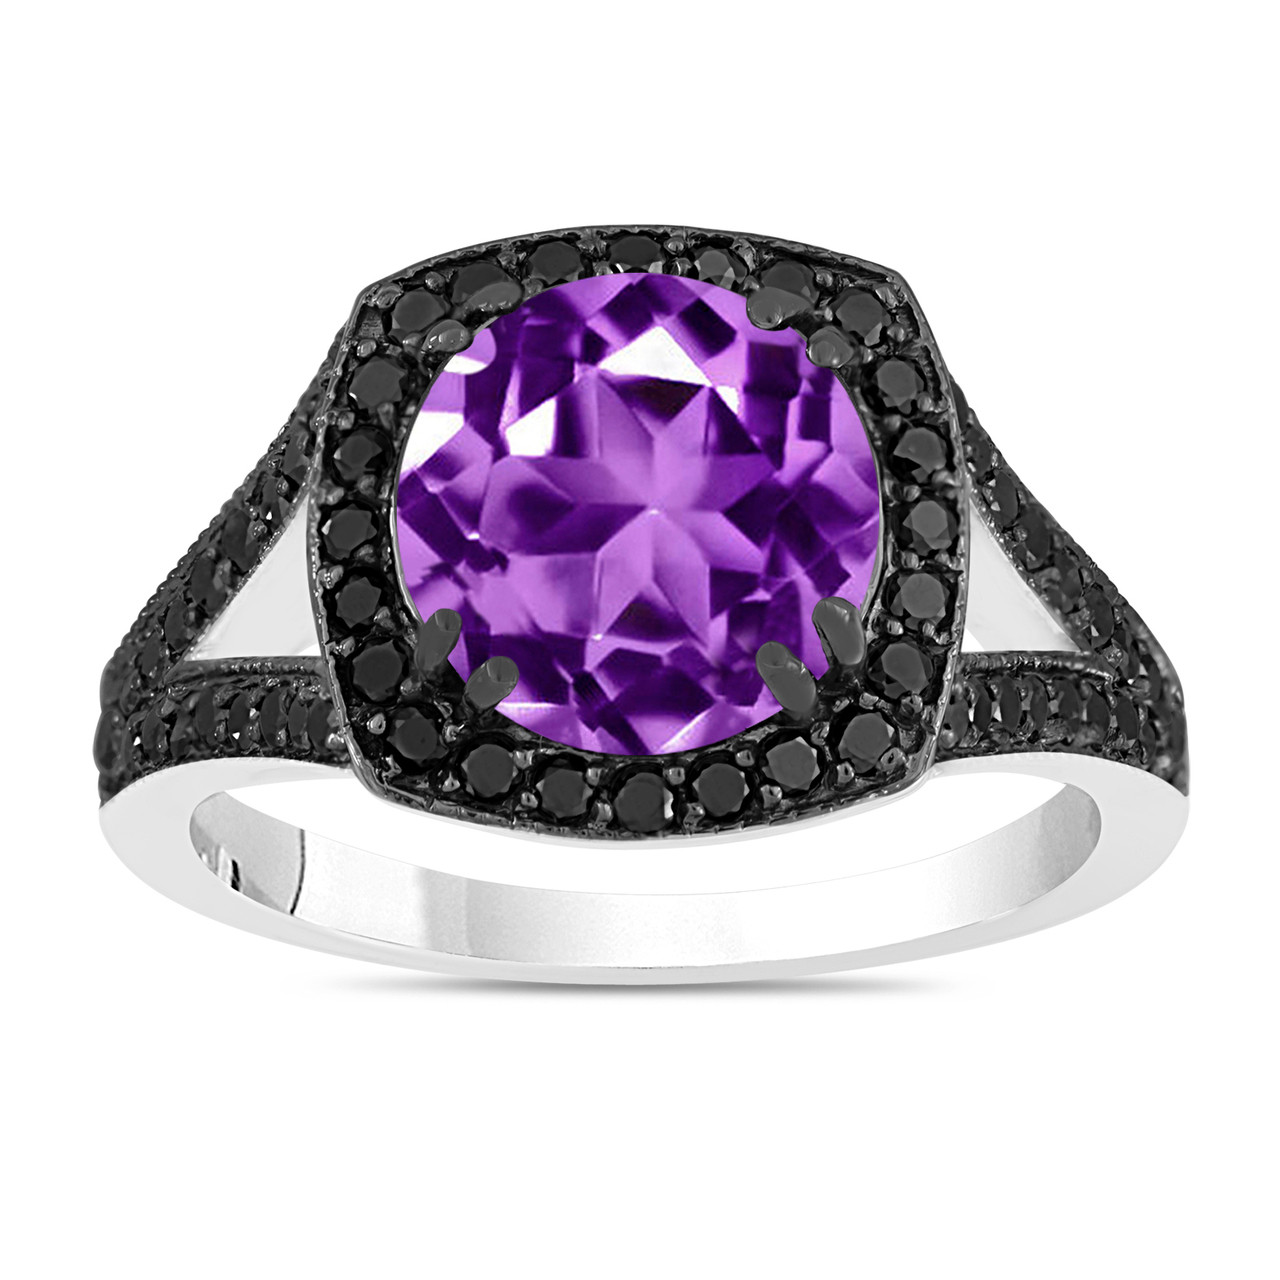 Amethyst Engagement Ring With Halo